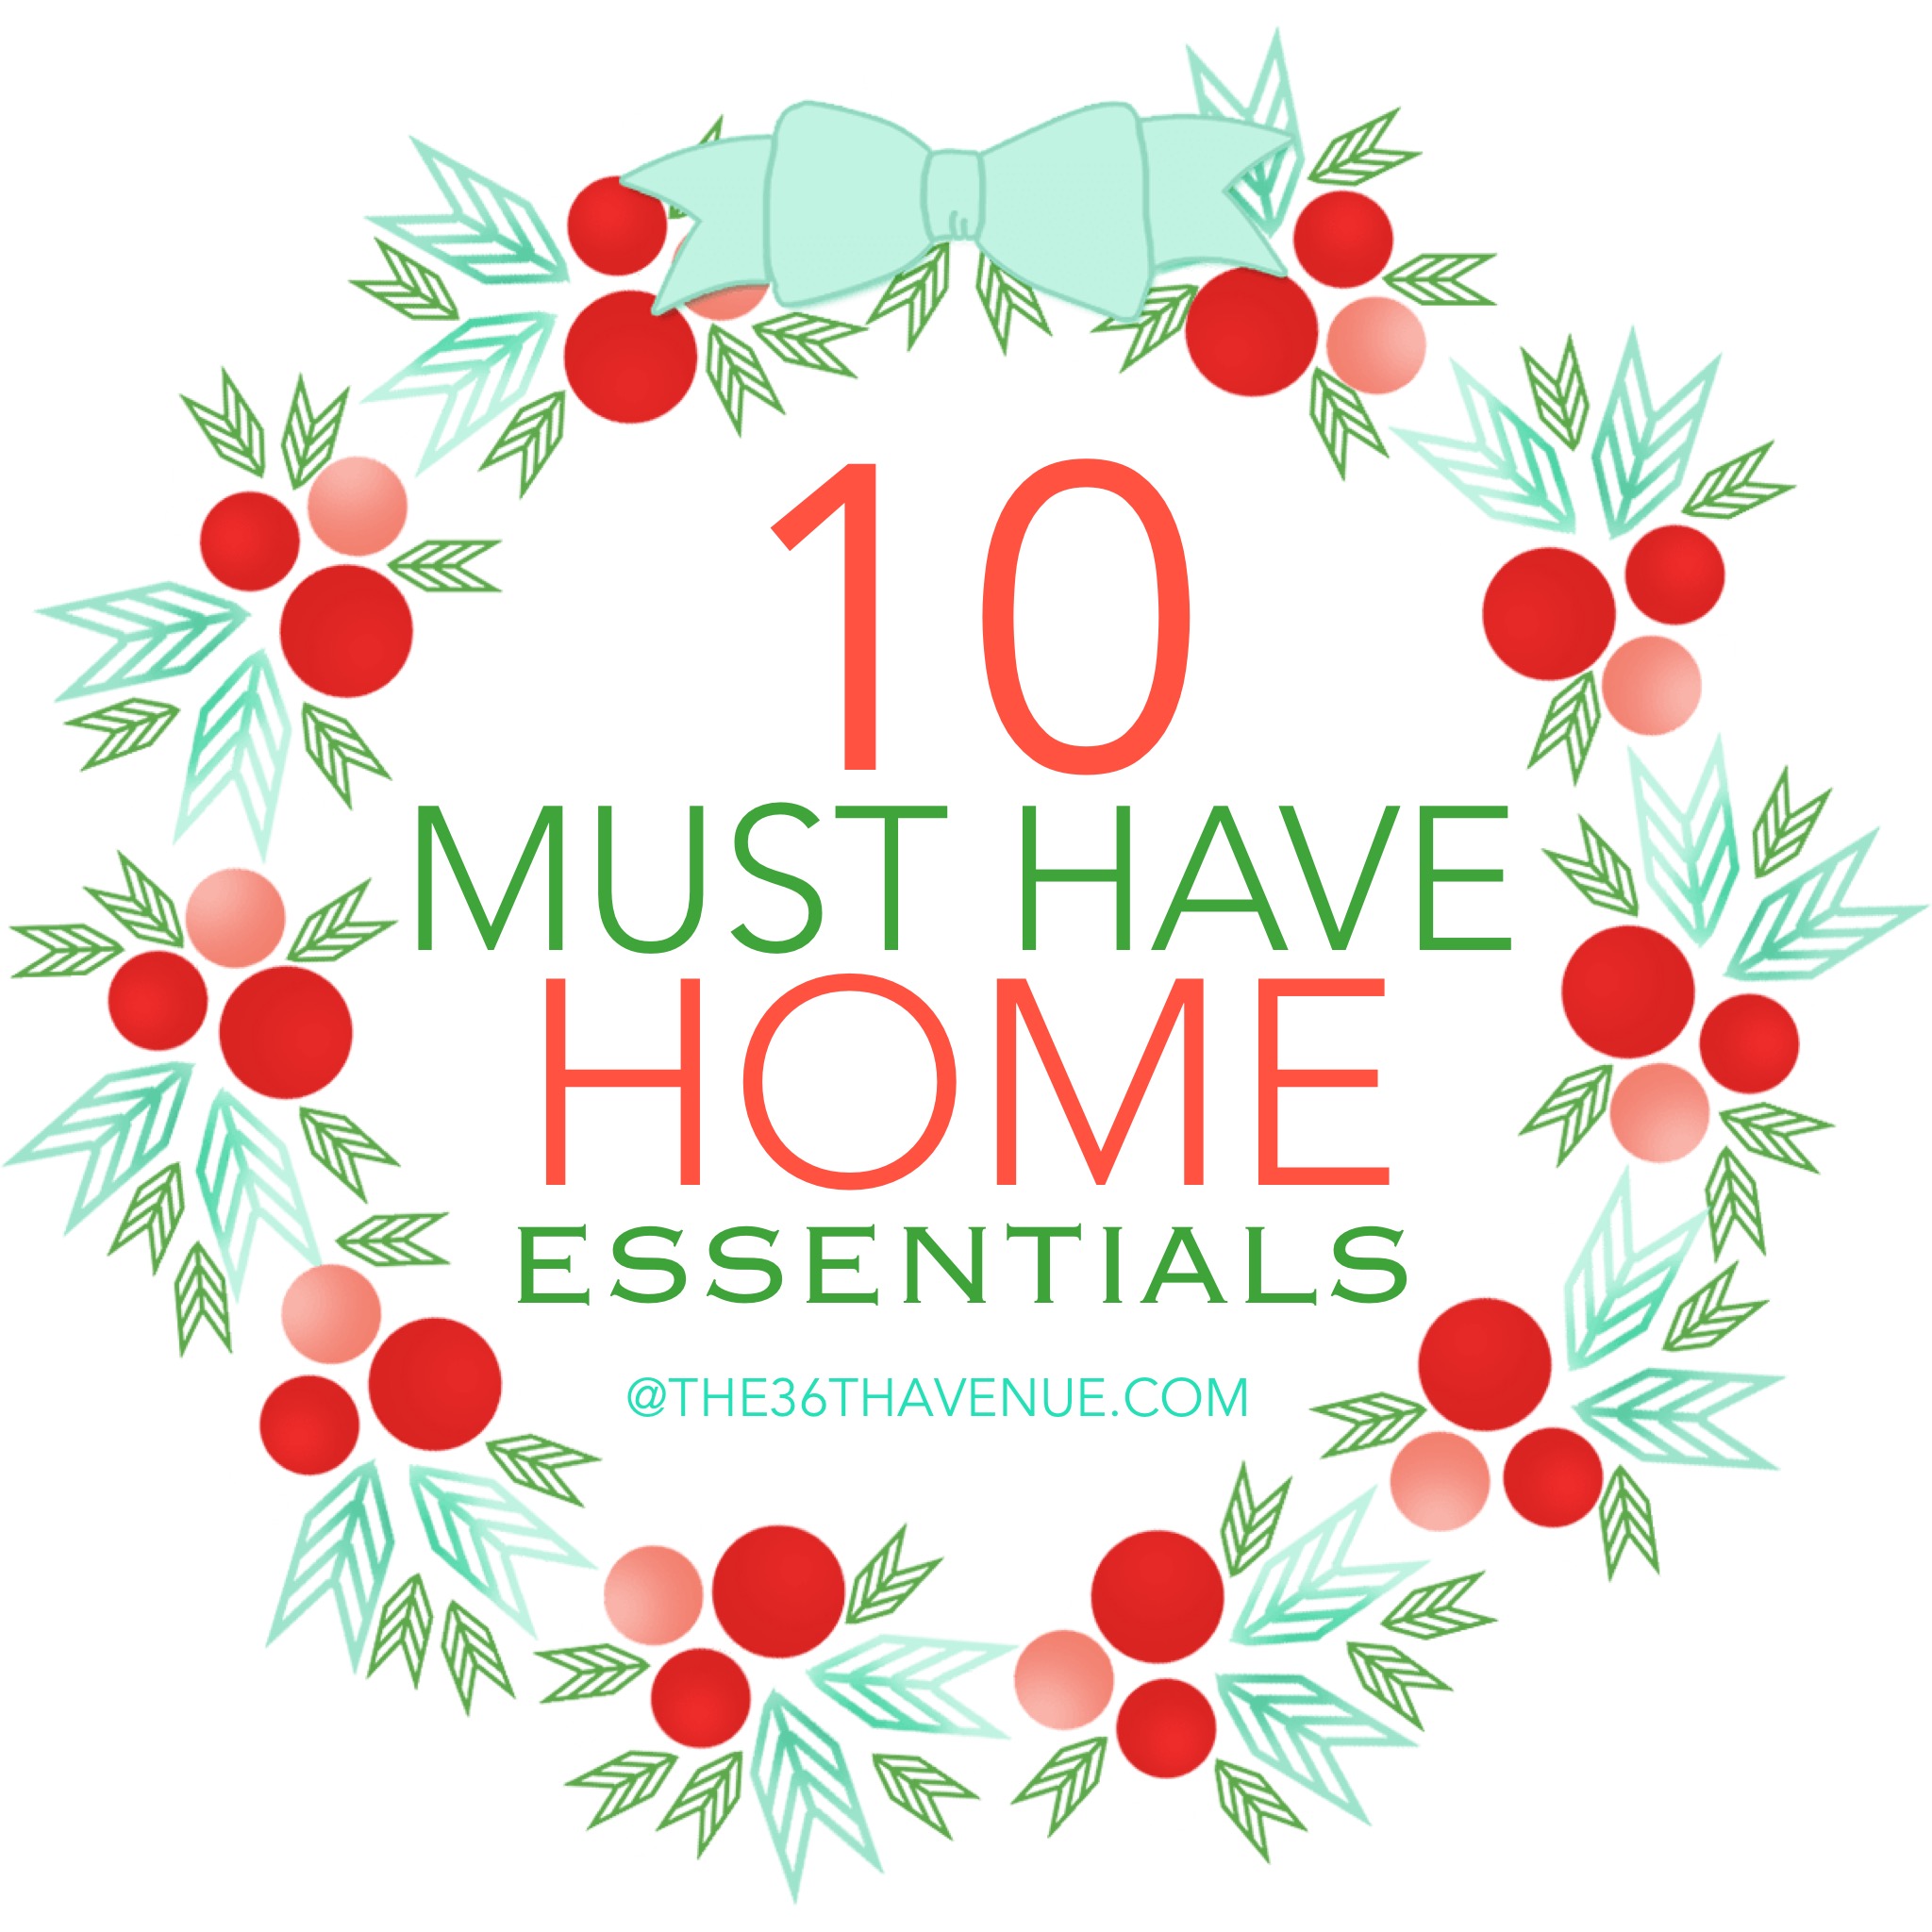 10 Must Have Home Essentials